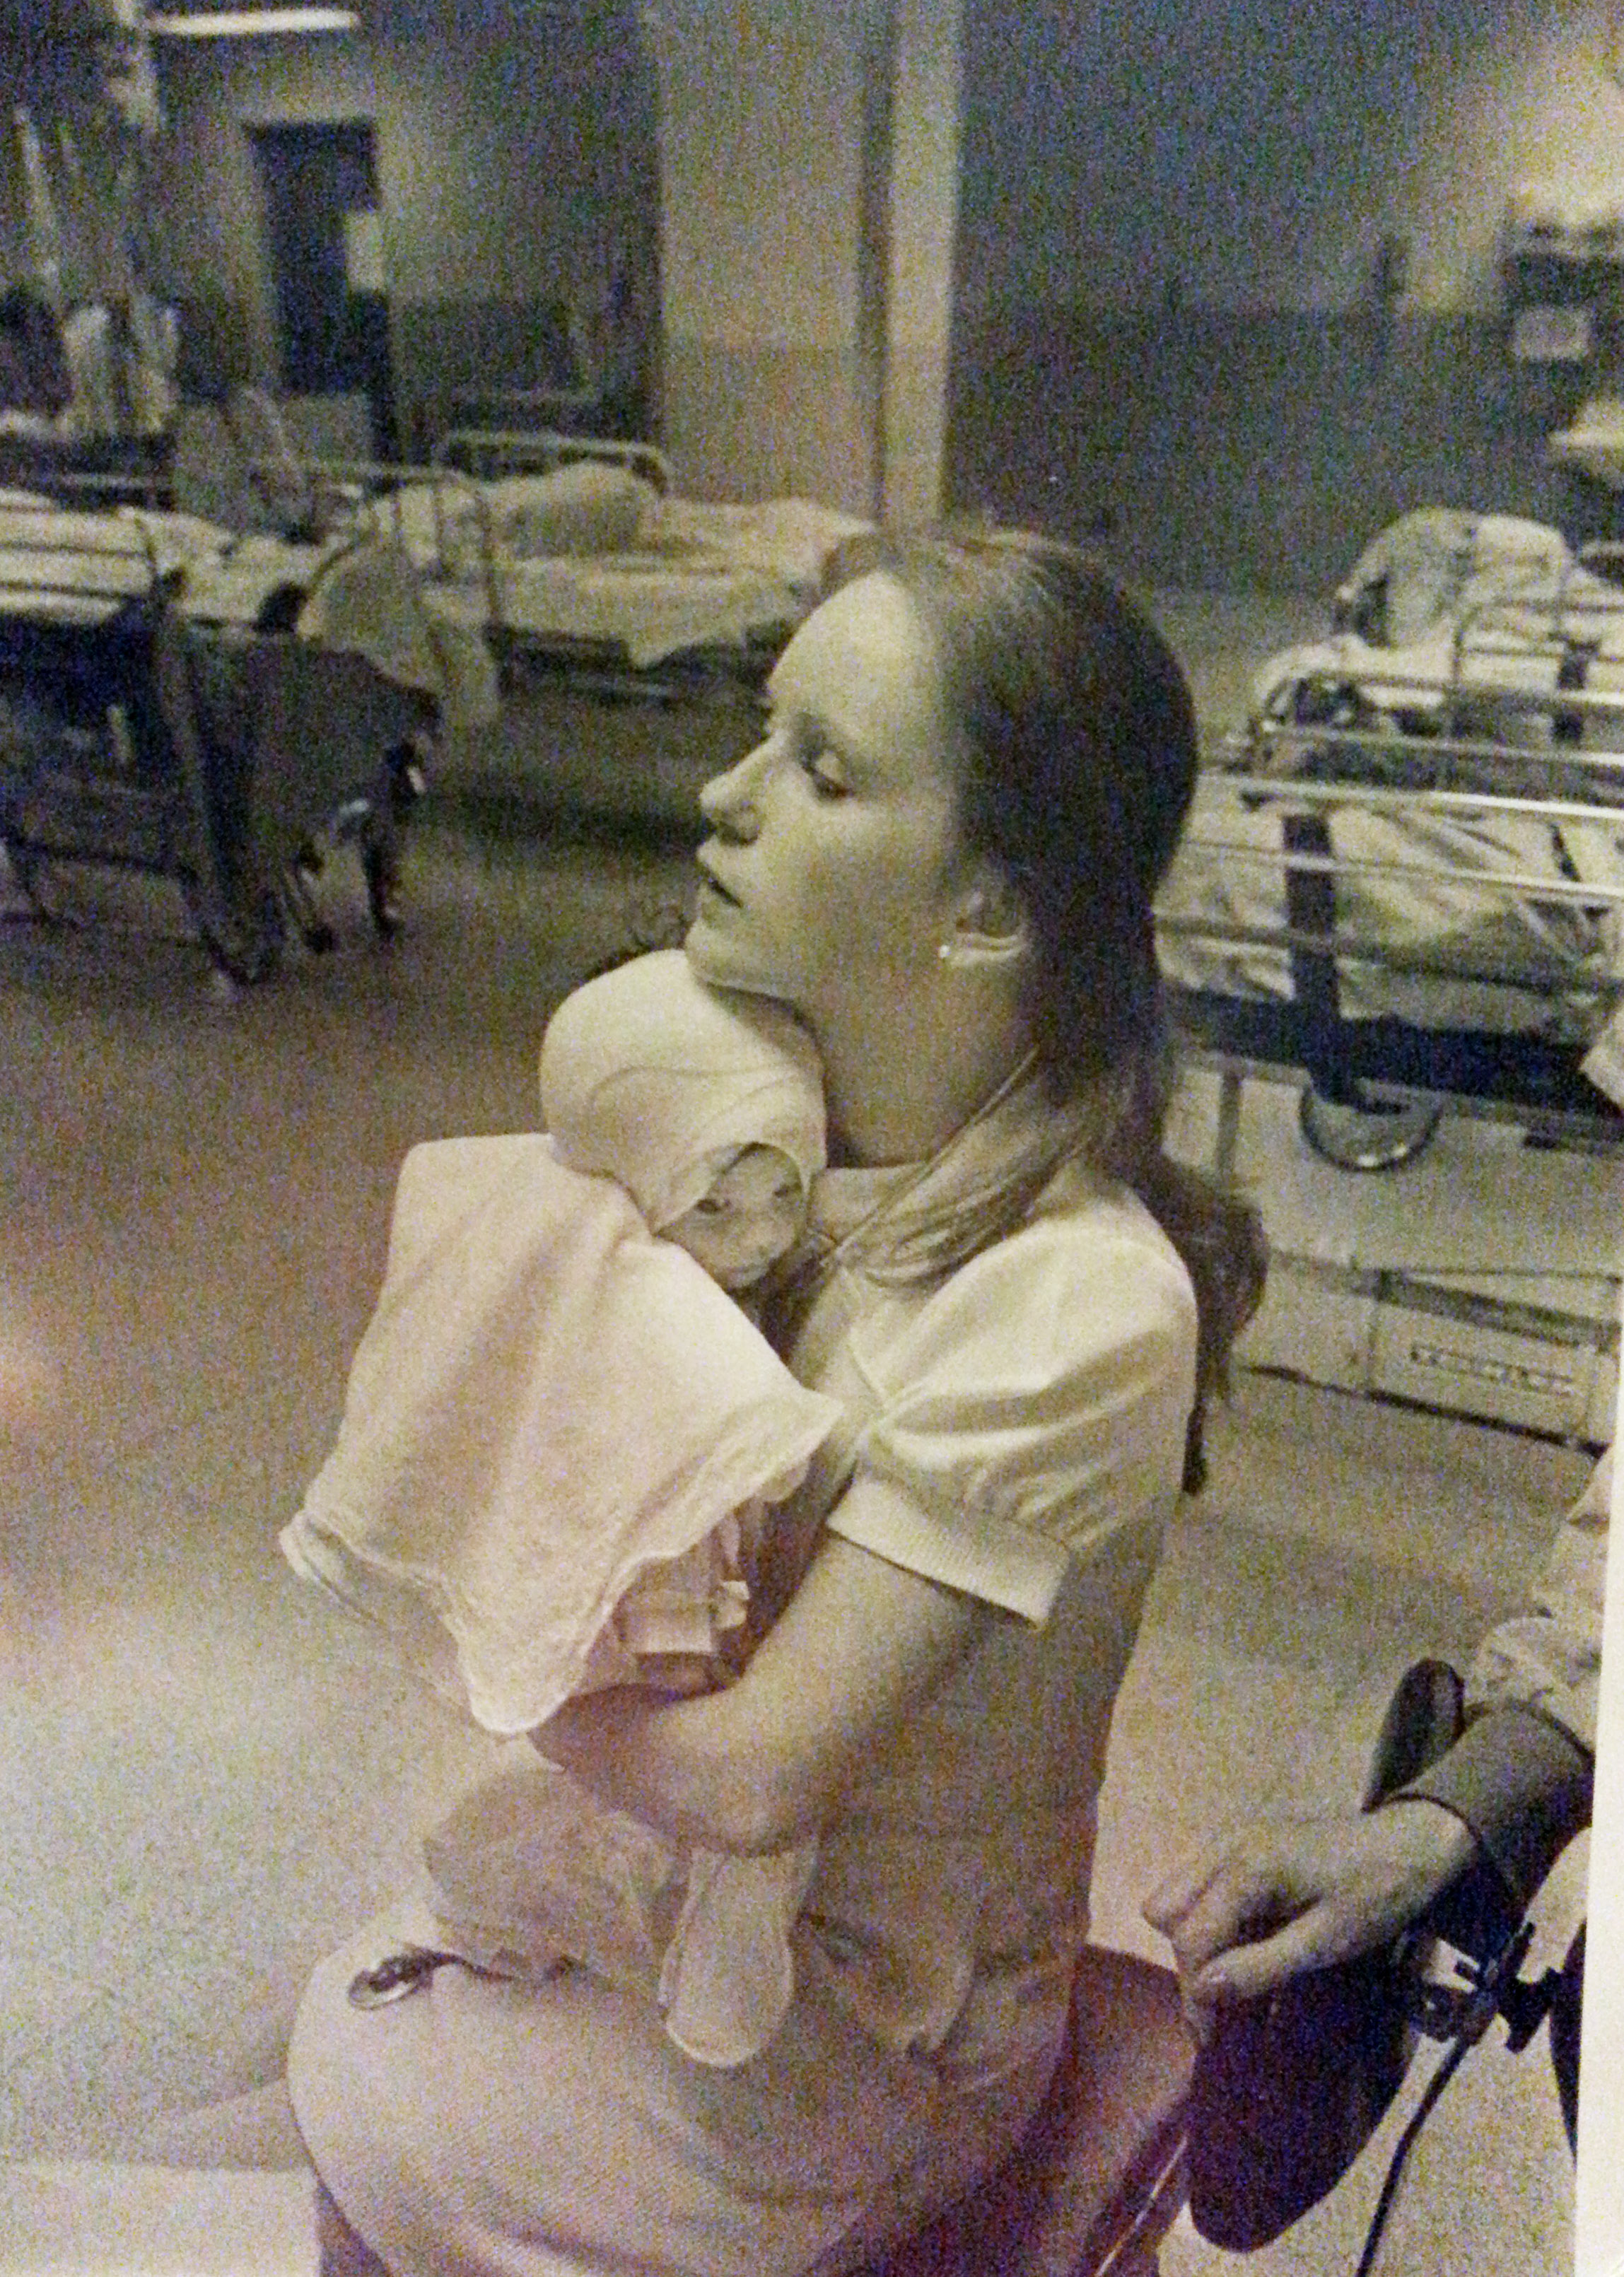 In this 1977 photo provided by Albany Medical Center, nurse Susan Berger cuddles infant Amanda Scarpinati, who had been severely burned by a steam vaporizer at home, in the pediatric unit at Albany Medical Center in Albany N.Y. Scarpinati kept the hospitals annual report that published the photo and was comforted by the picture when she was bullied for her burn scars as a child. She recently used social media to learn Bergers identity so she could thank her for her loving care. Albany Medical Center has arranged for the two women to meet on Tuesday, Sept. 29, 2015. (Carl Howard/Albany Medical Center via AP)